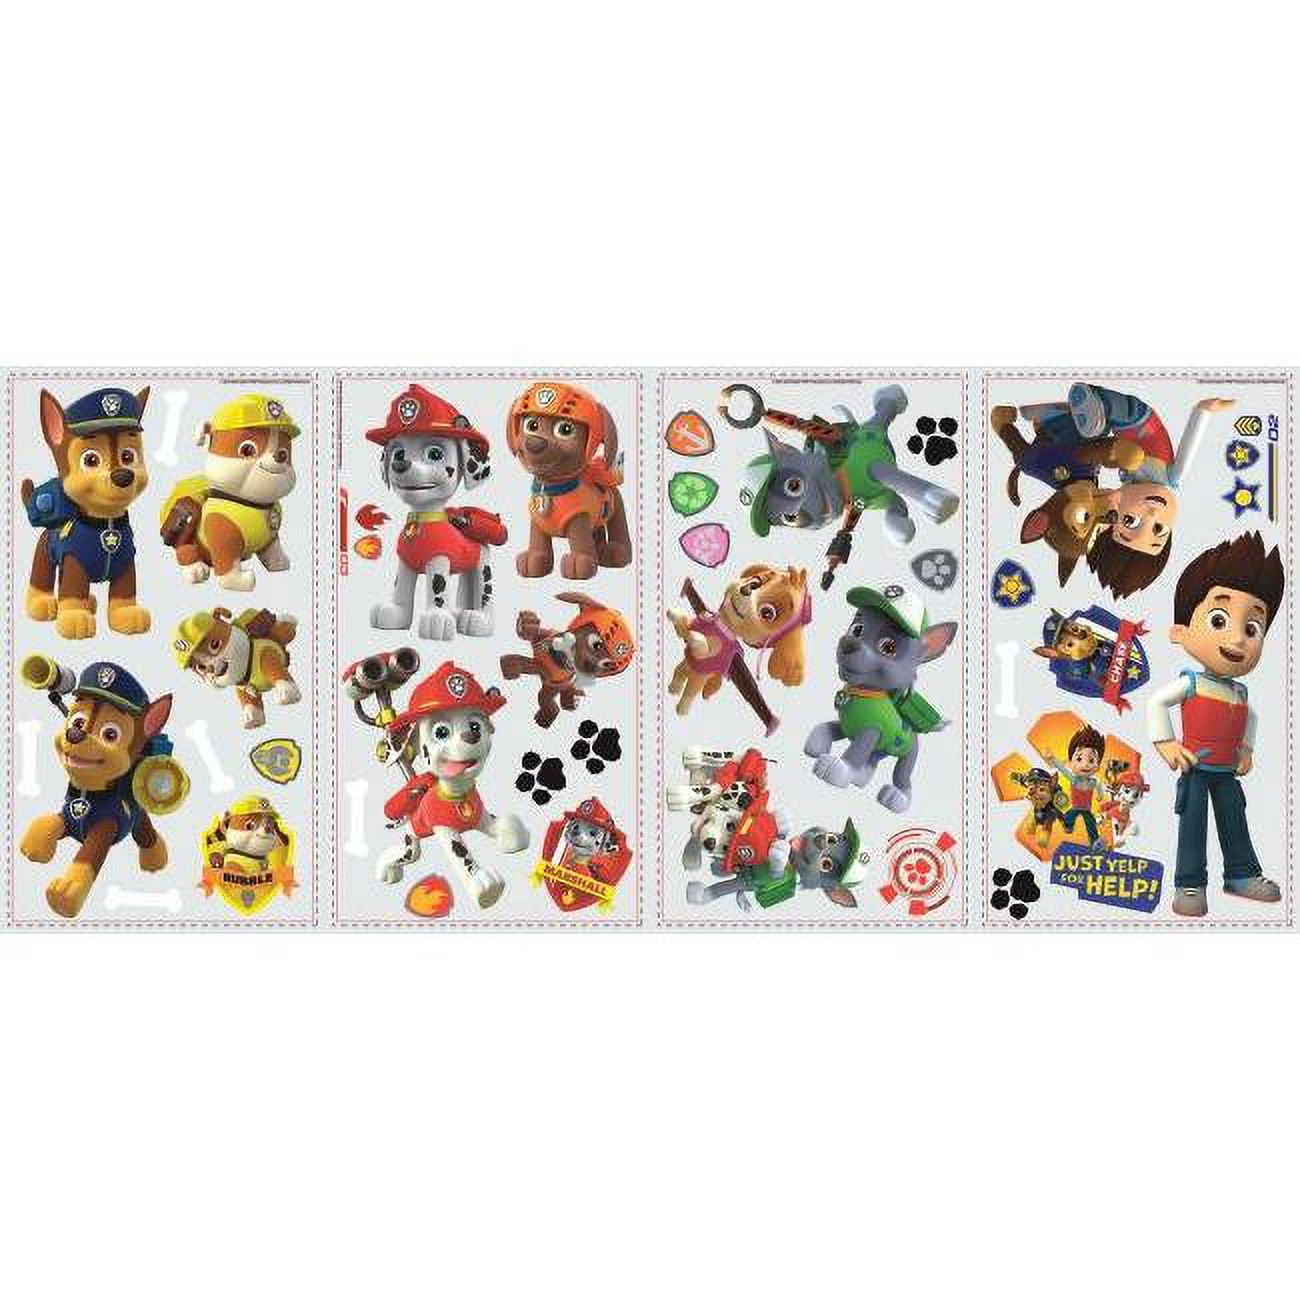 PAW Patrol Wall Decals - image 4 of 8